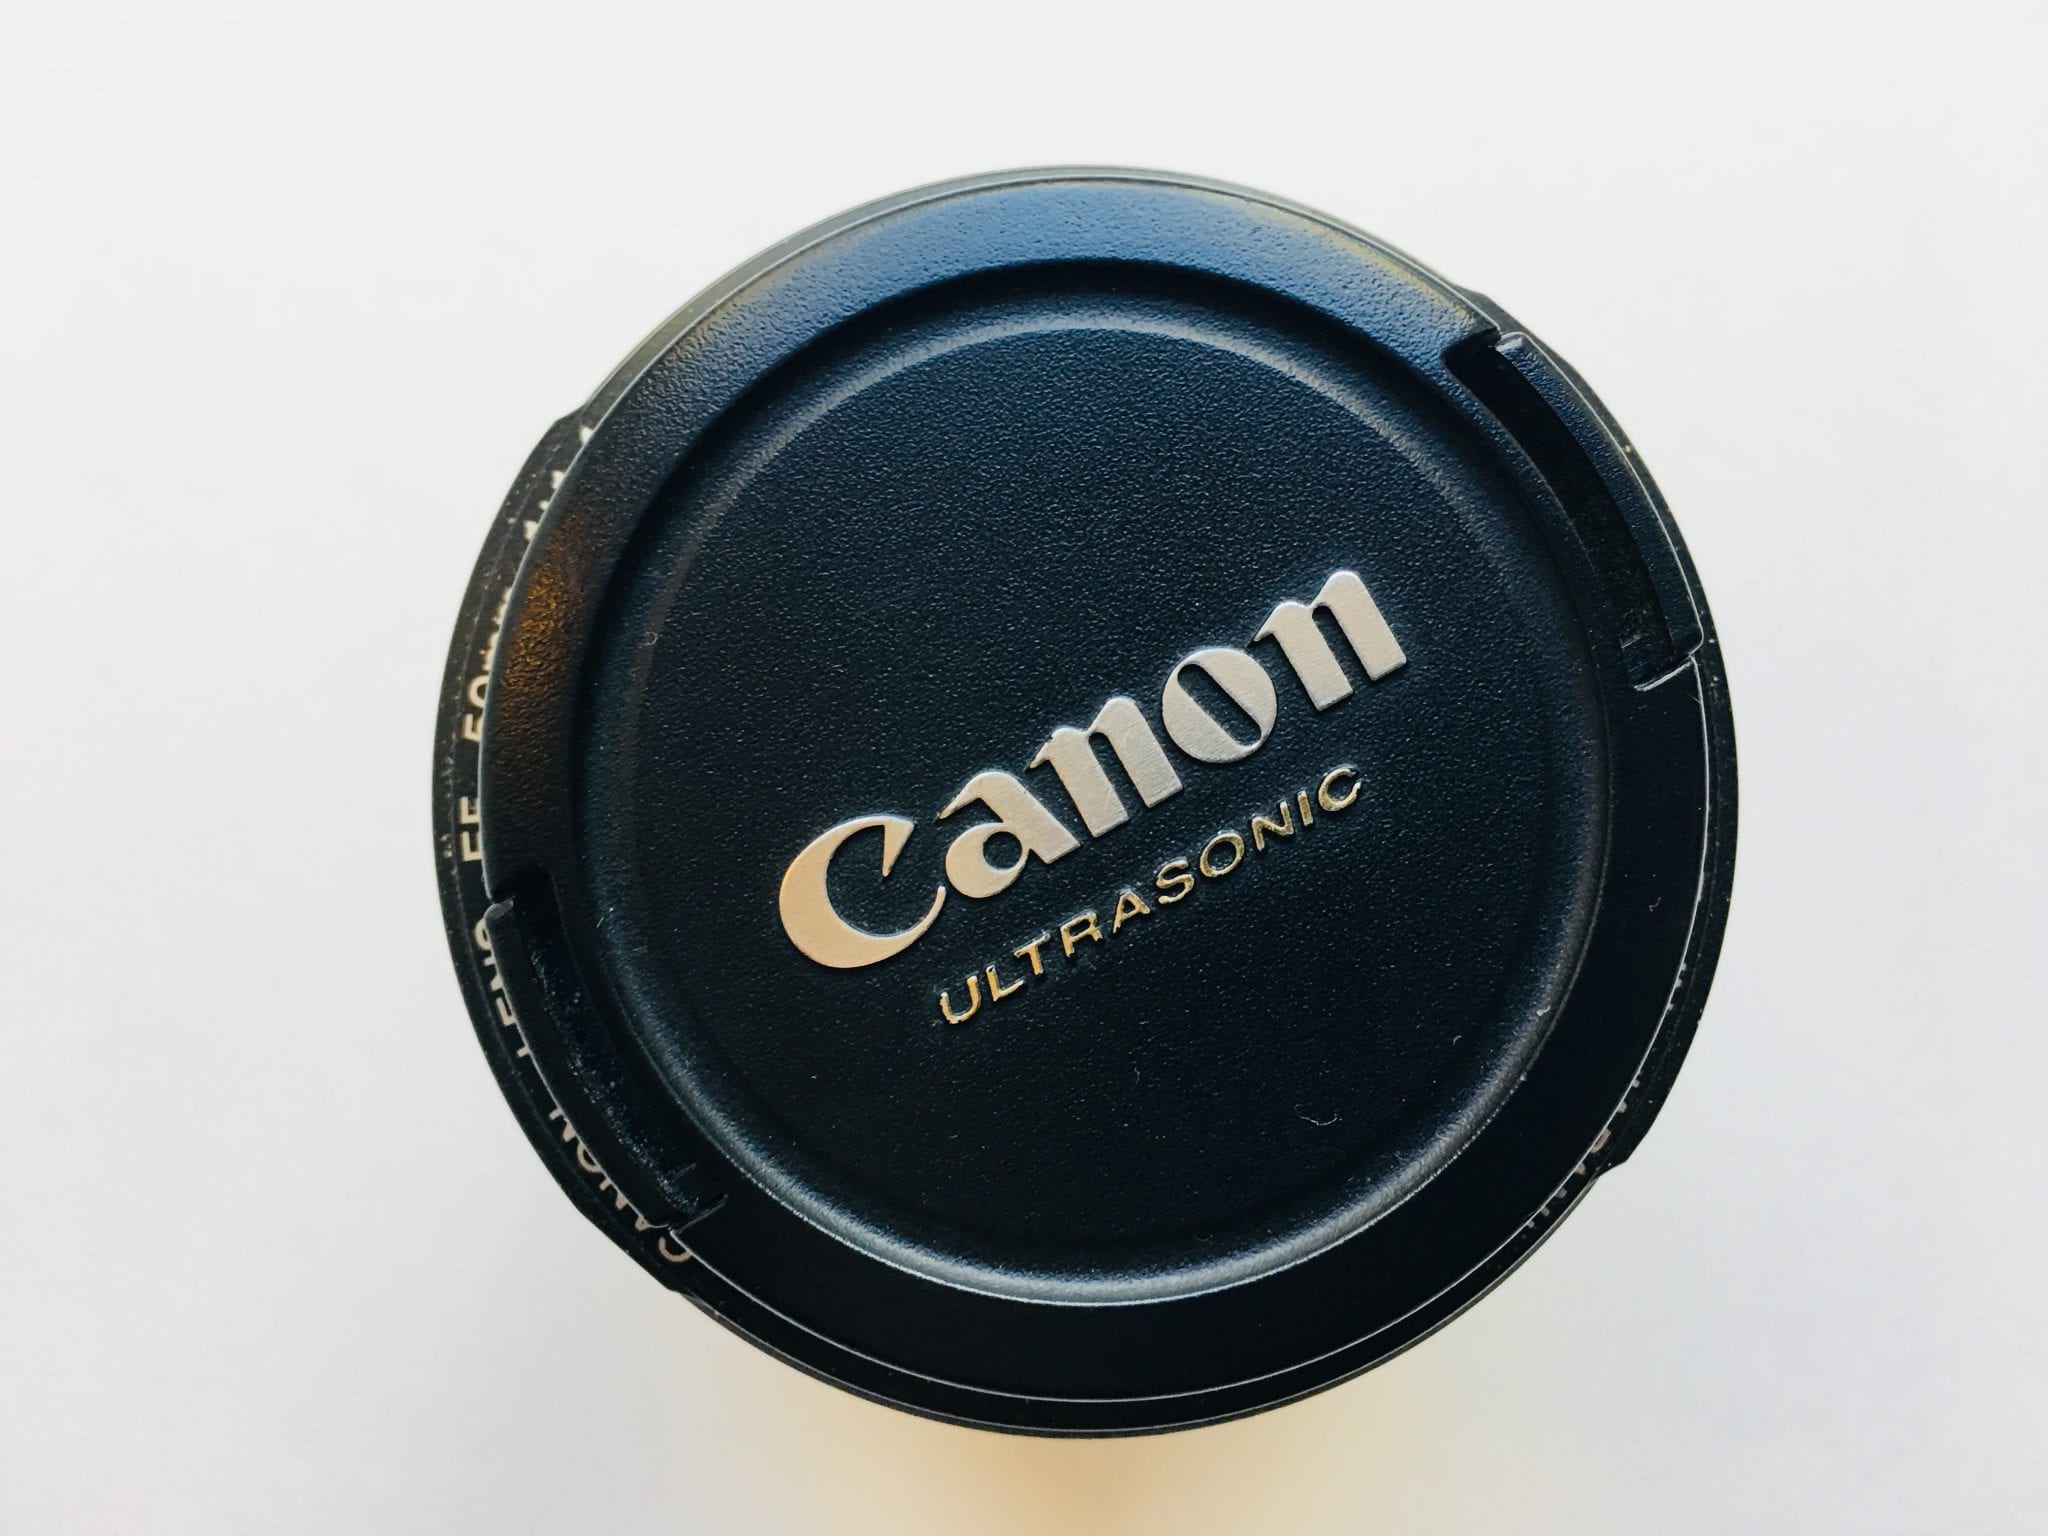 50mm 1.4 Canon lens review